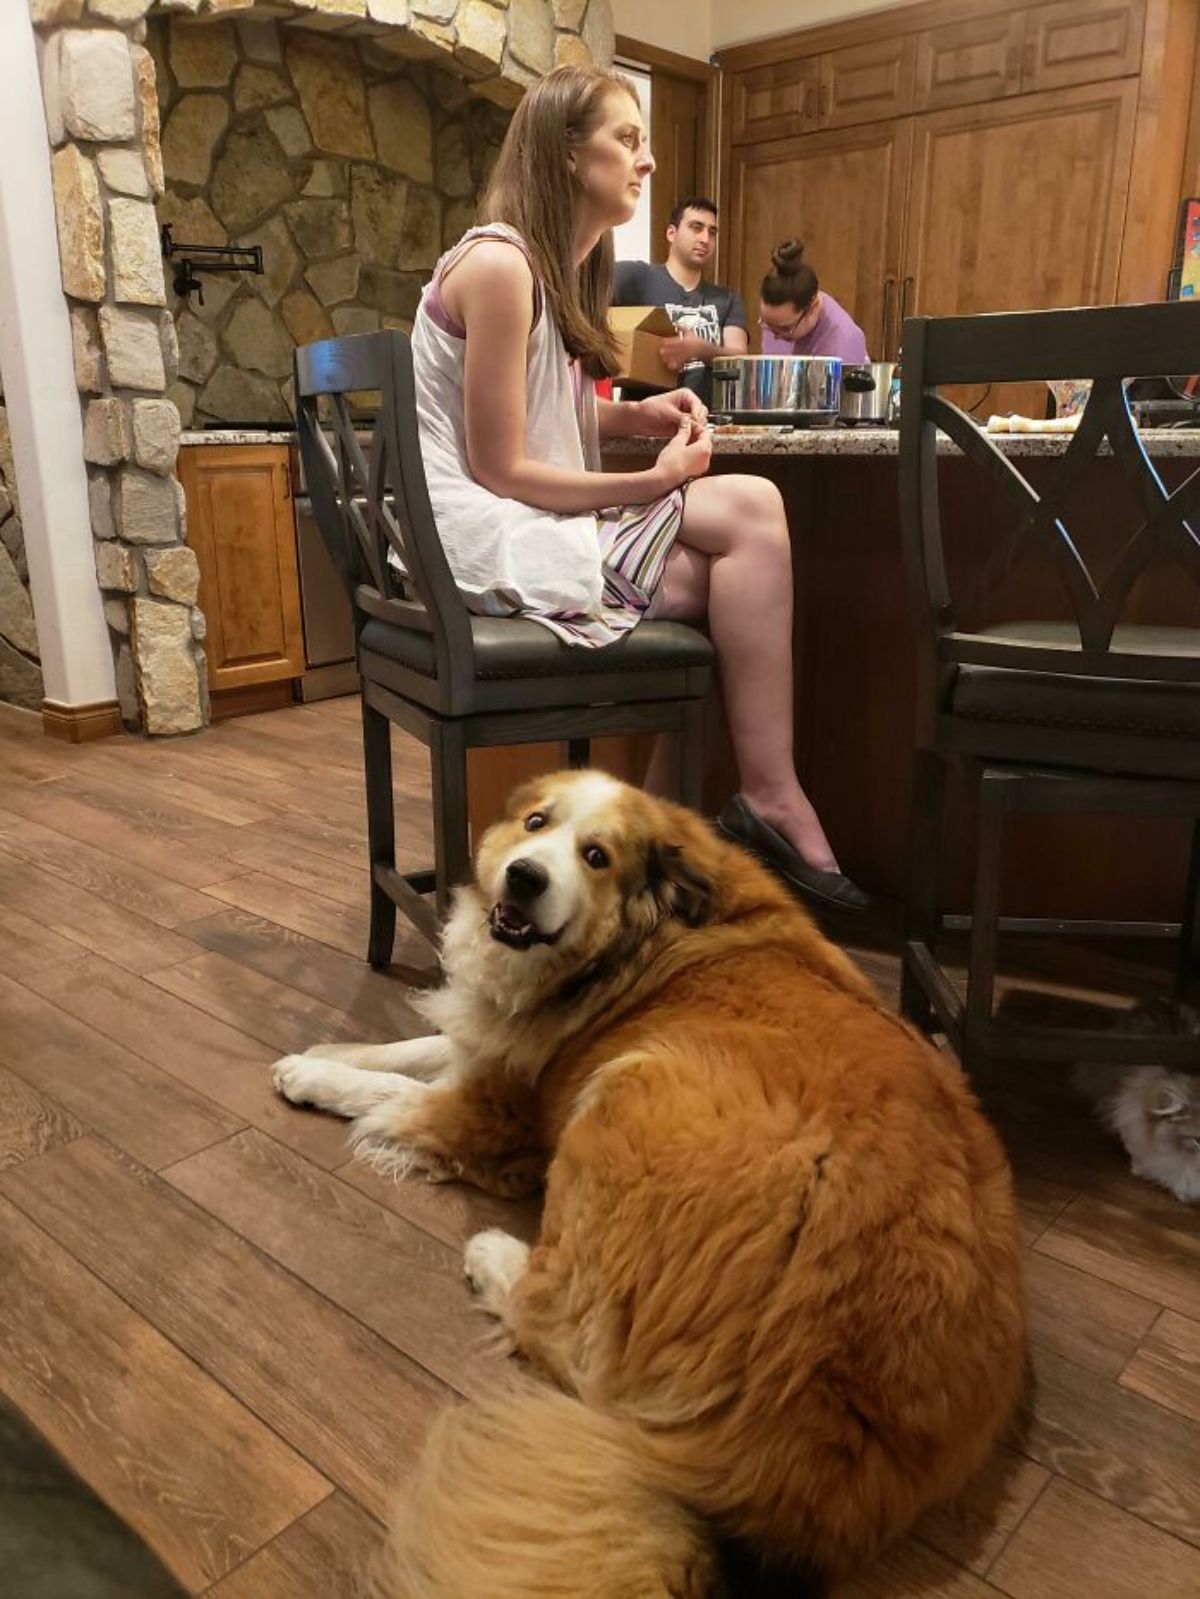 large fluffy brown and white dog laying on the floor by a woman